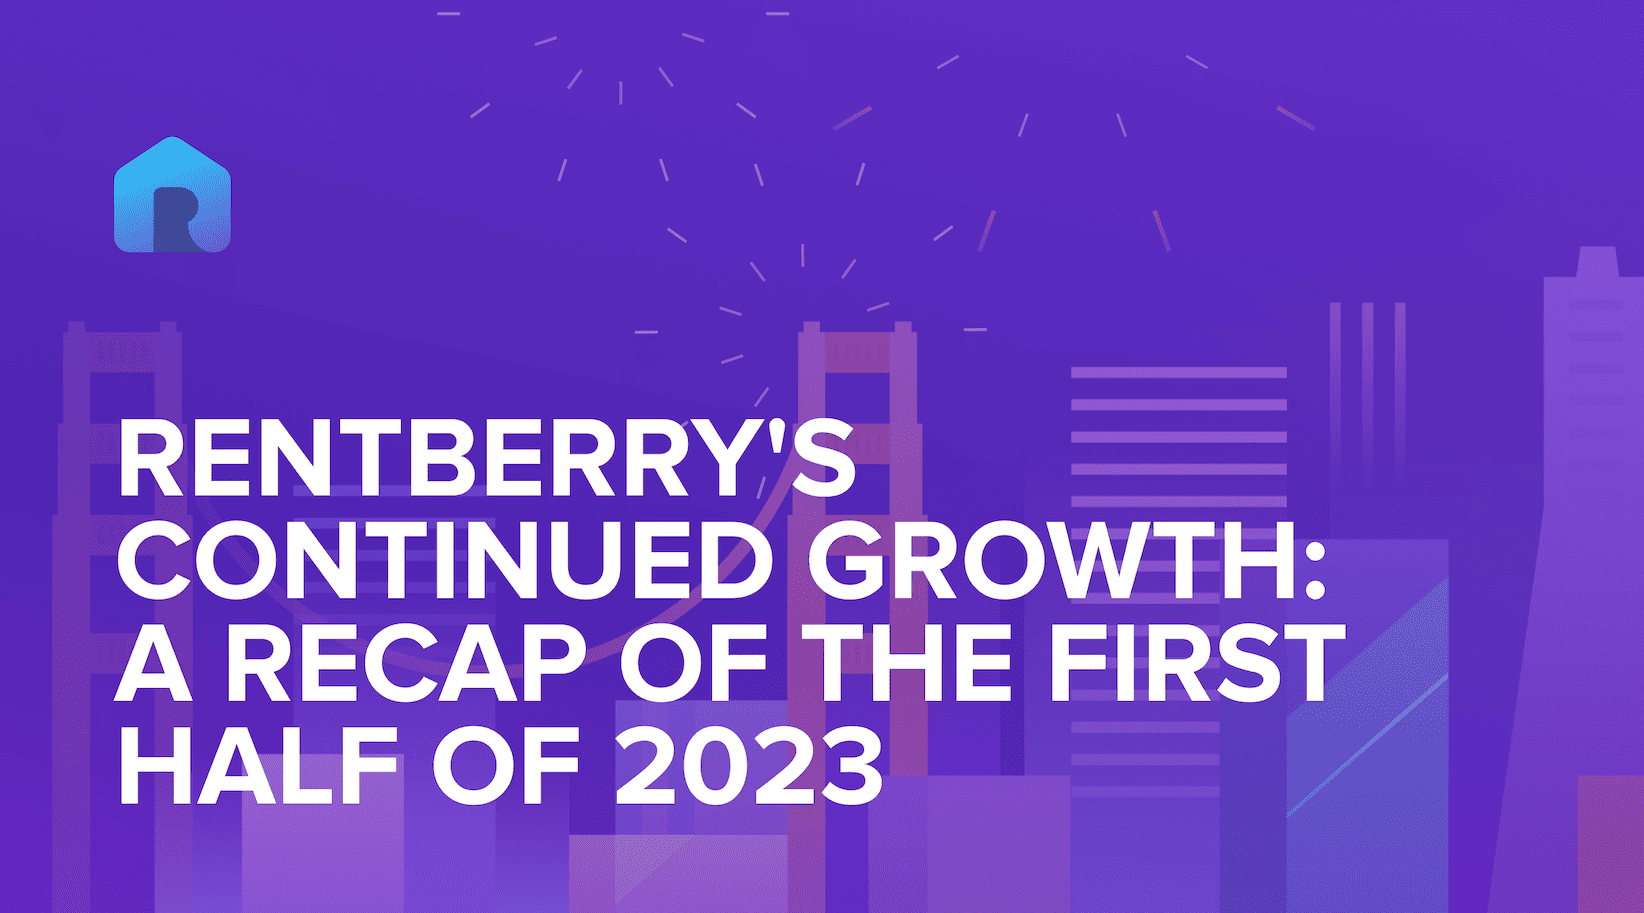 news and improvements on Rentberry